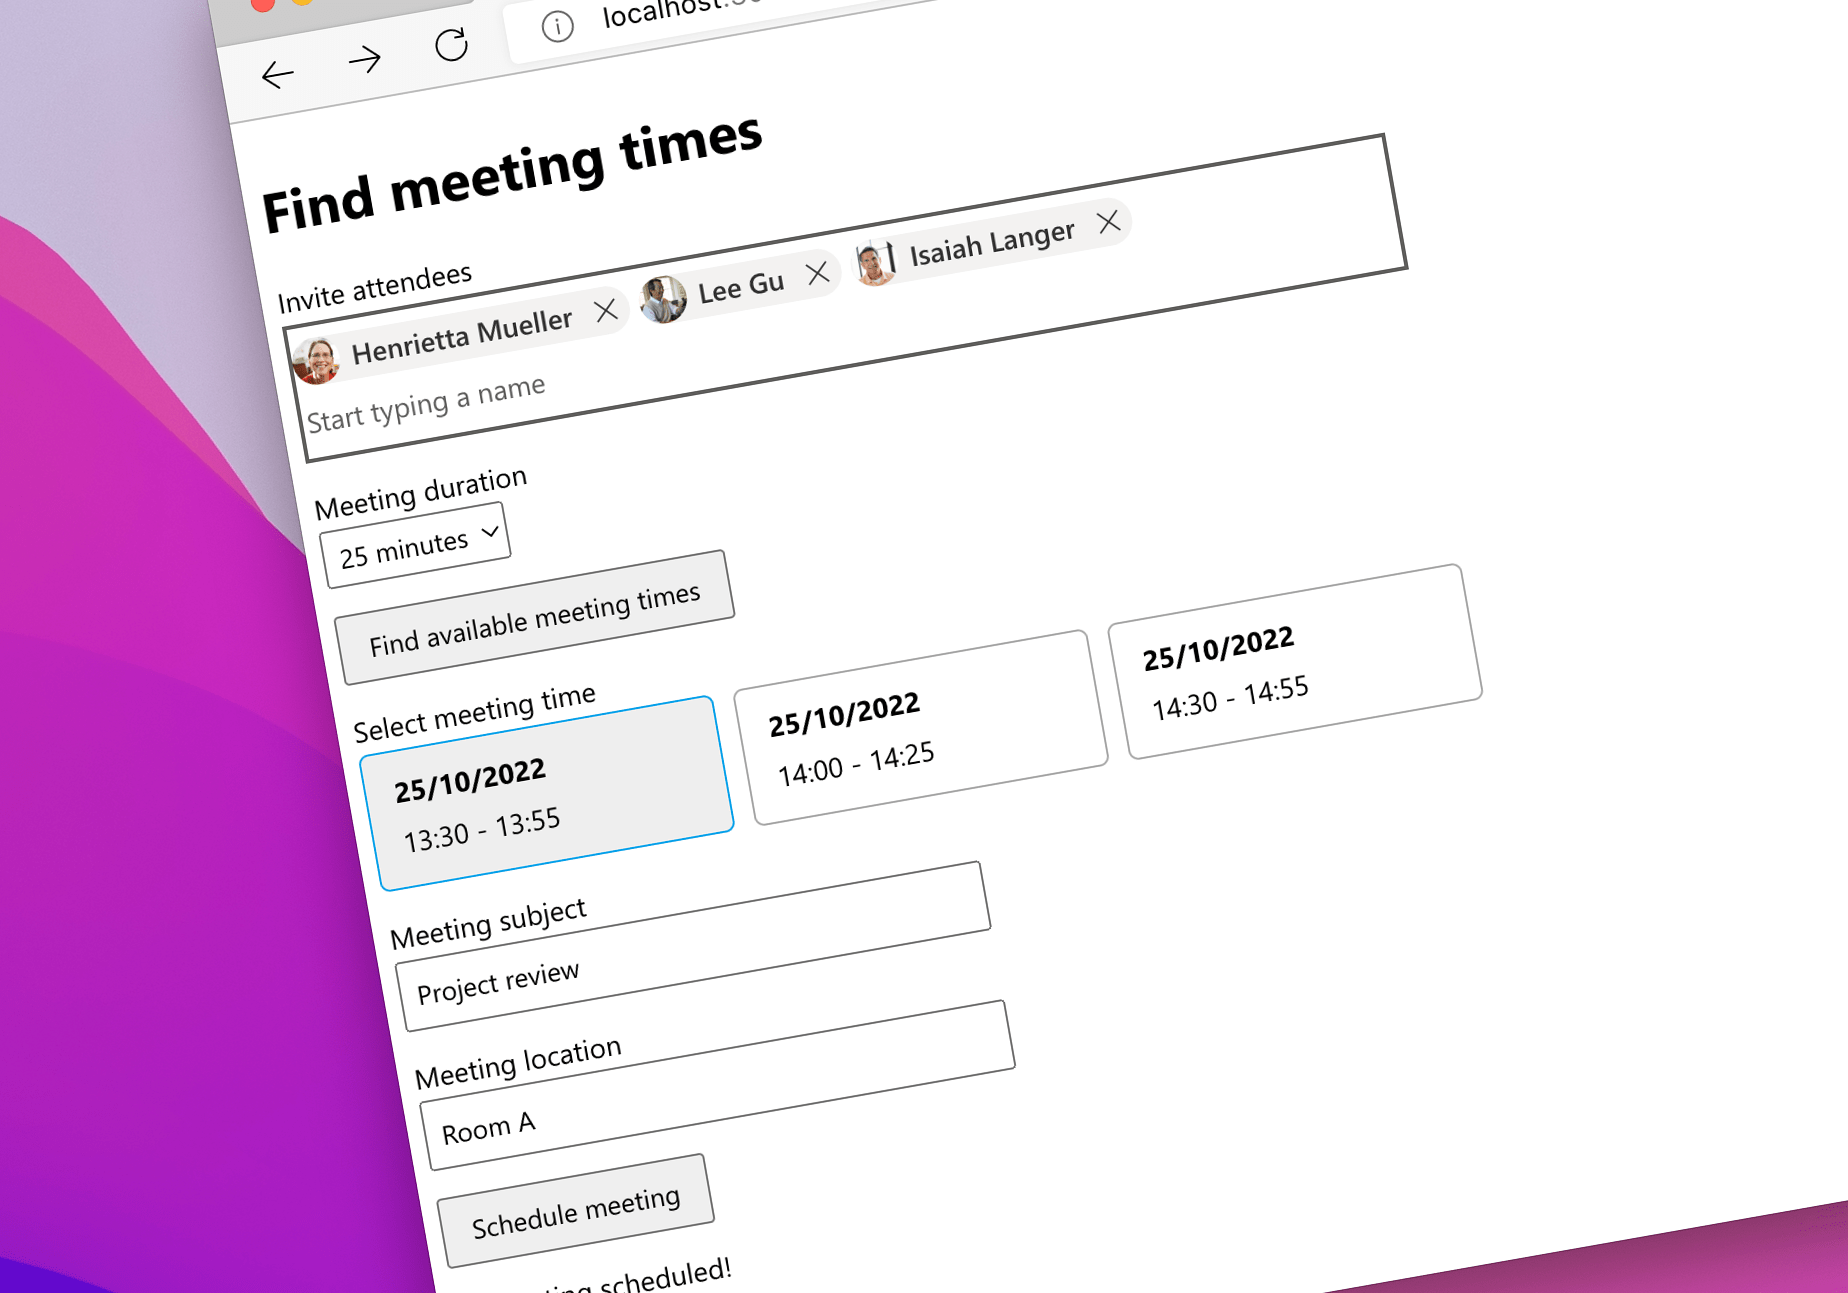 Find a meeting time and schedule a meeting on Microsoft 365